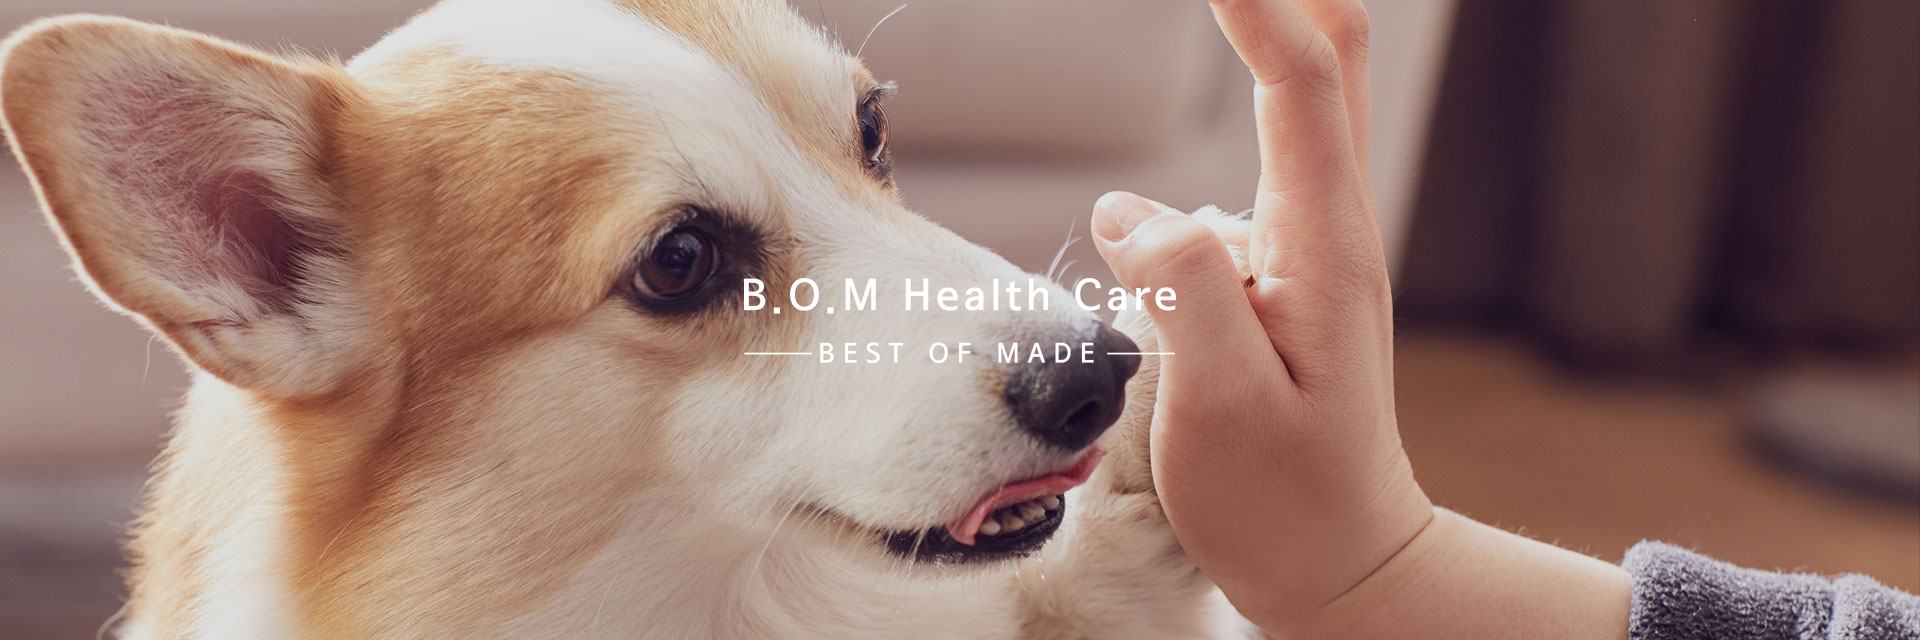 bomhealthcare